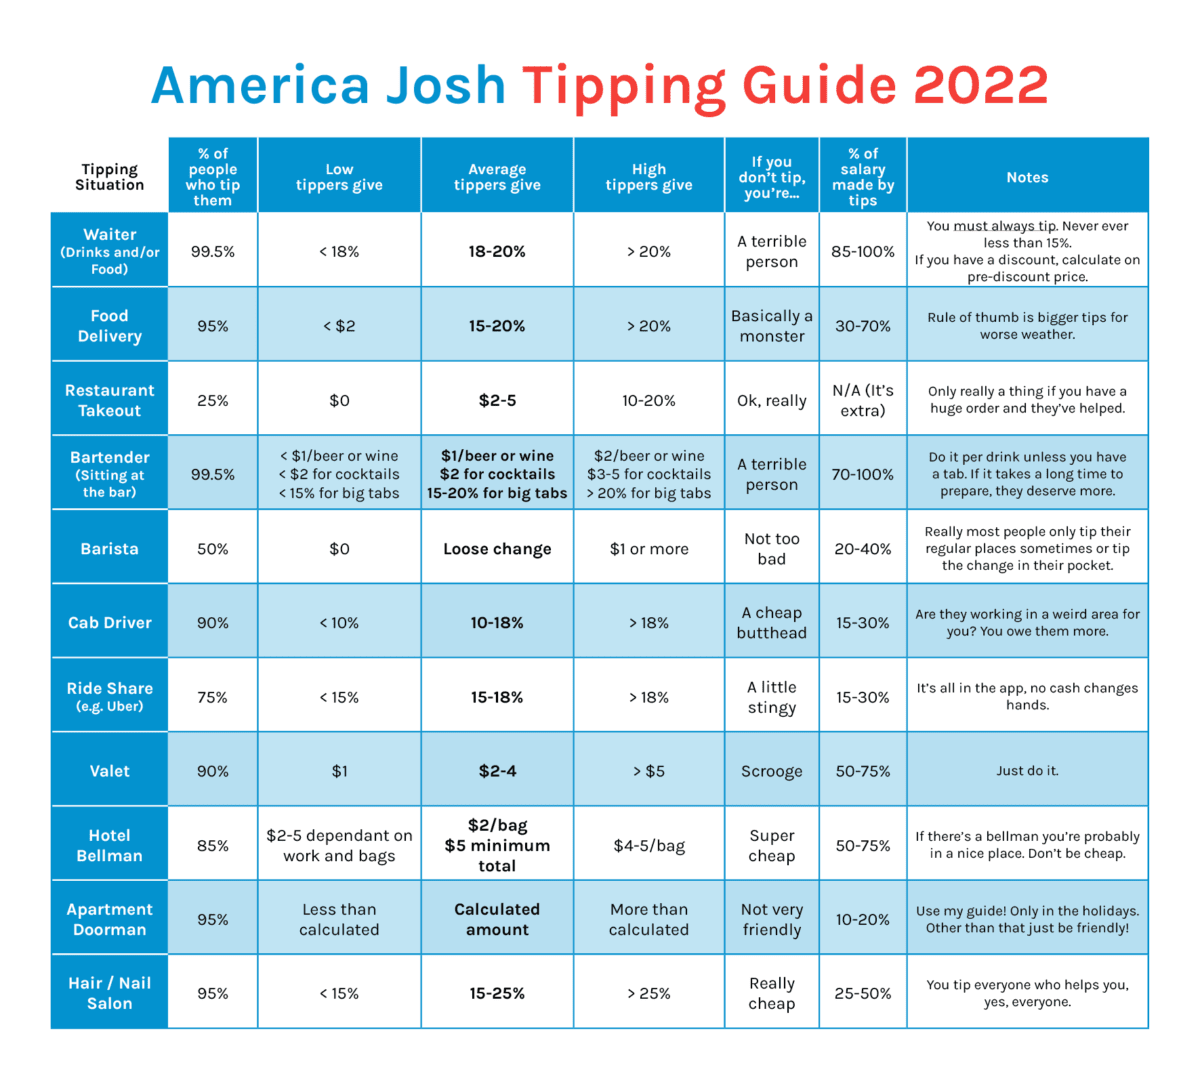 America Josh's Guide to Tipping 2022